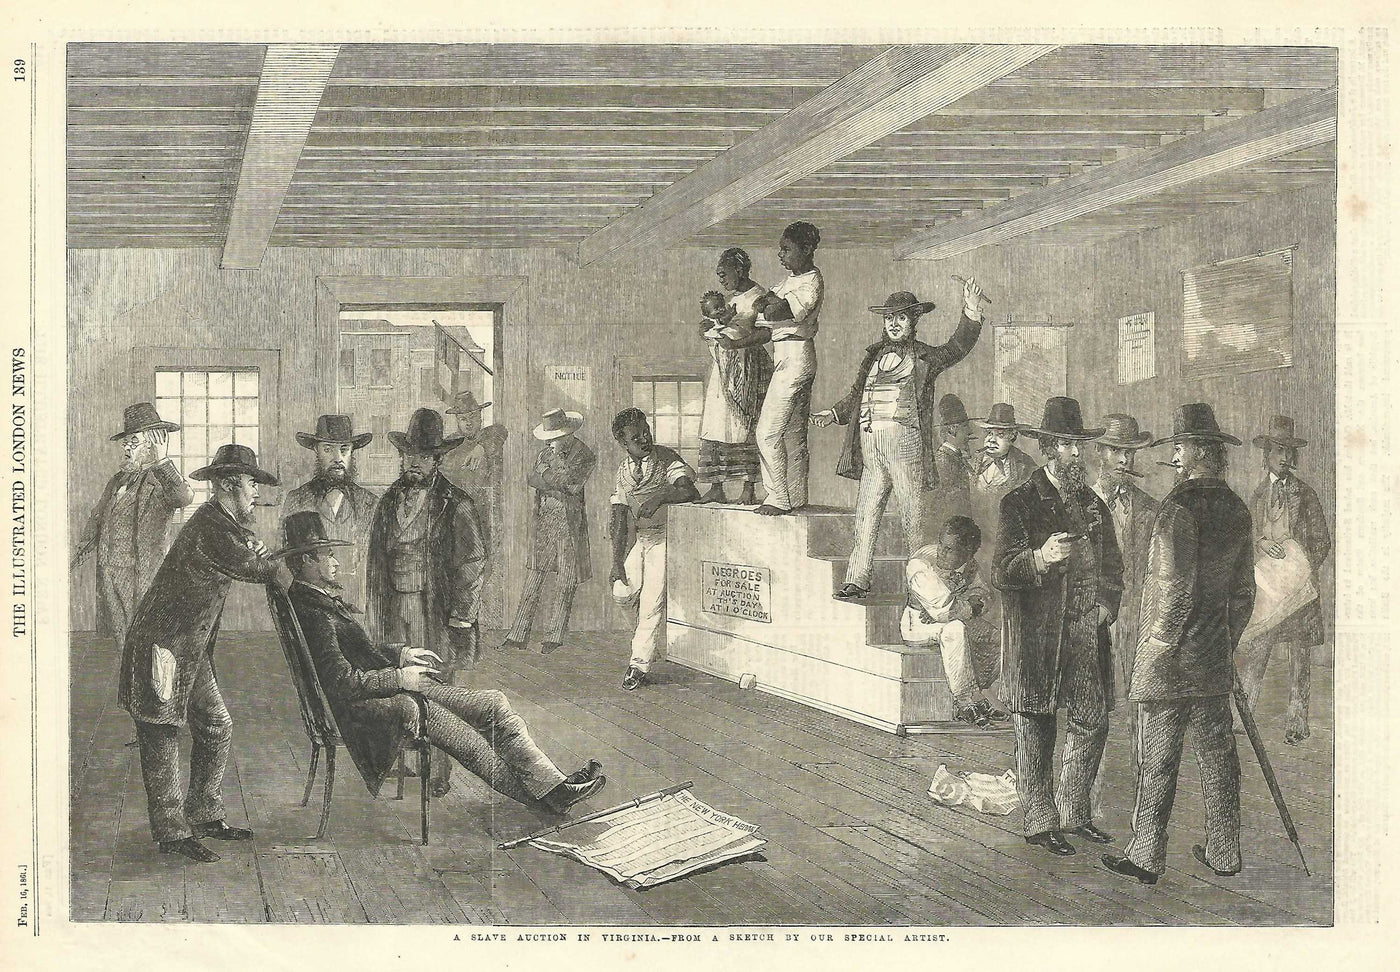 Slave auction in Virginia months prior to American Civil War